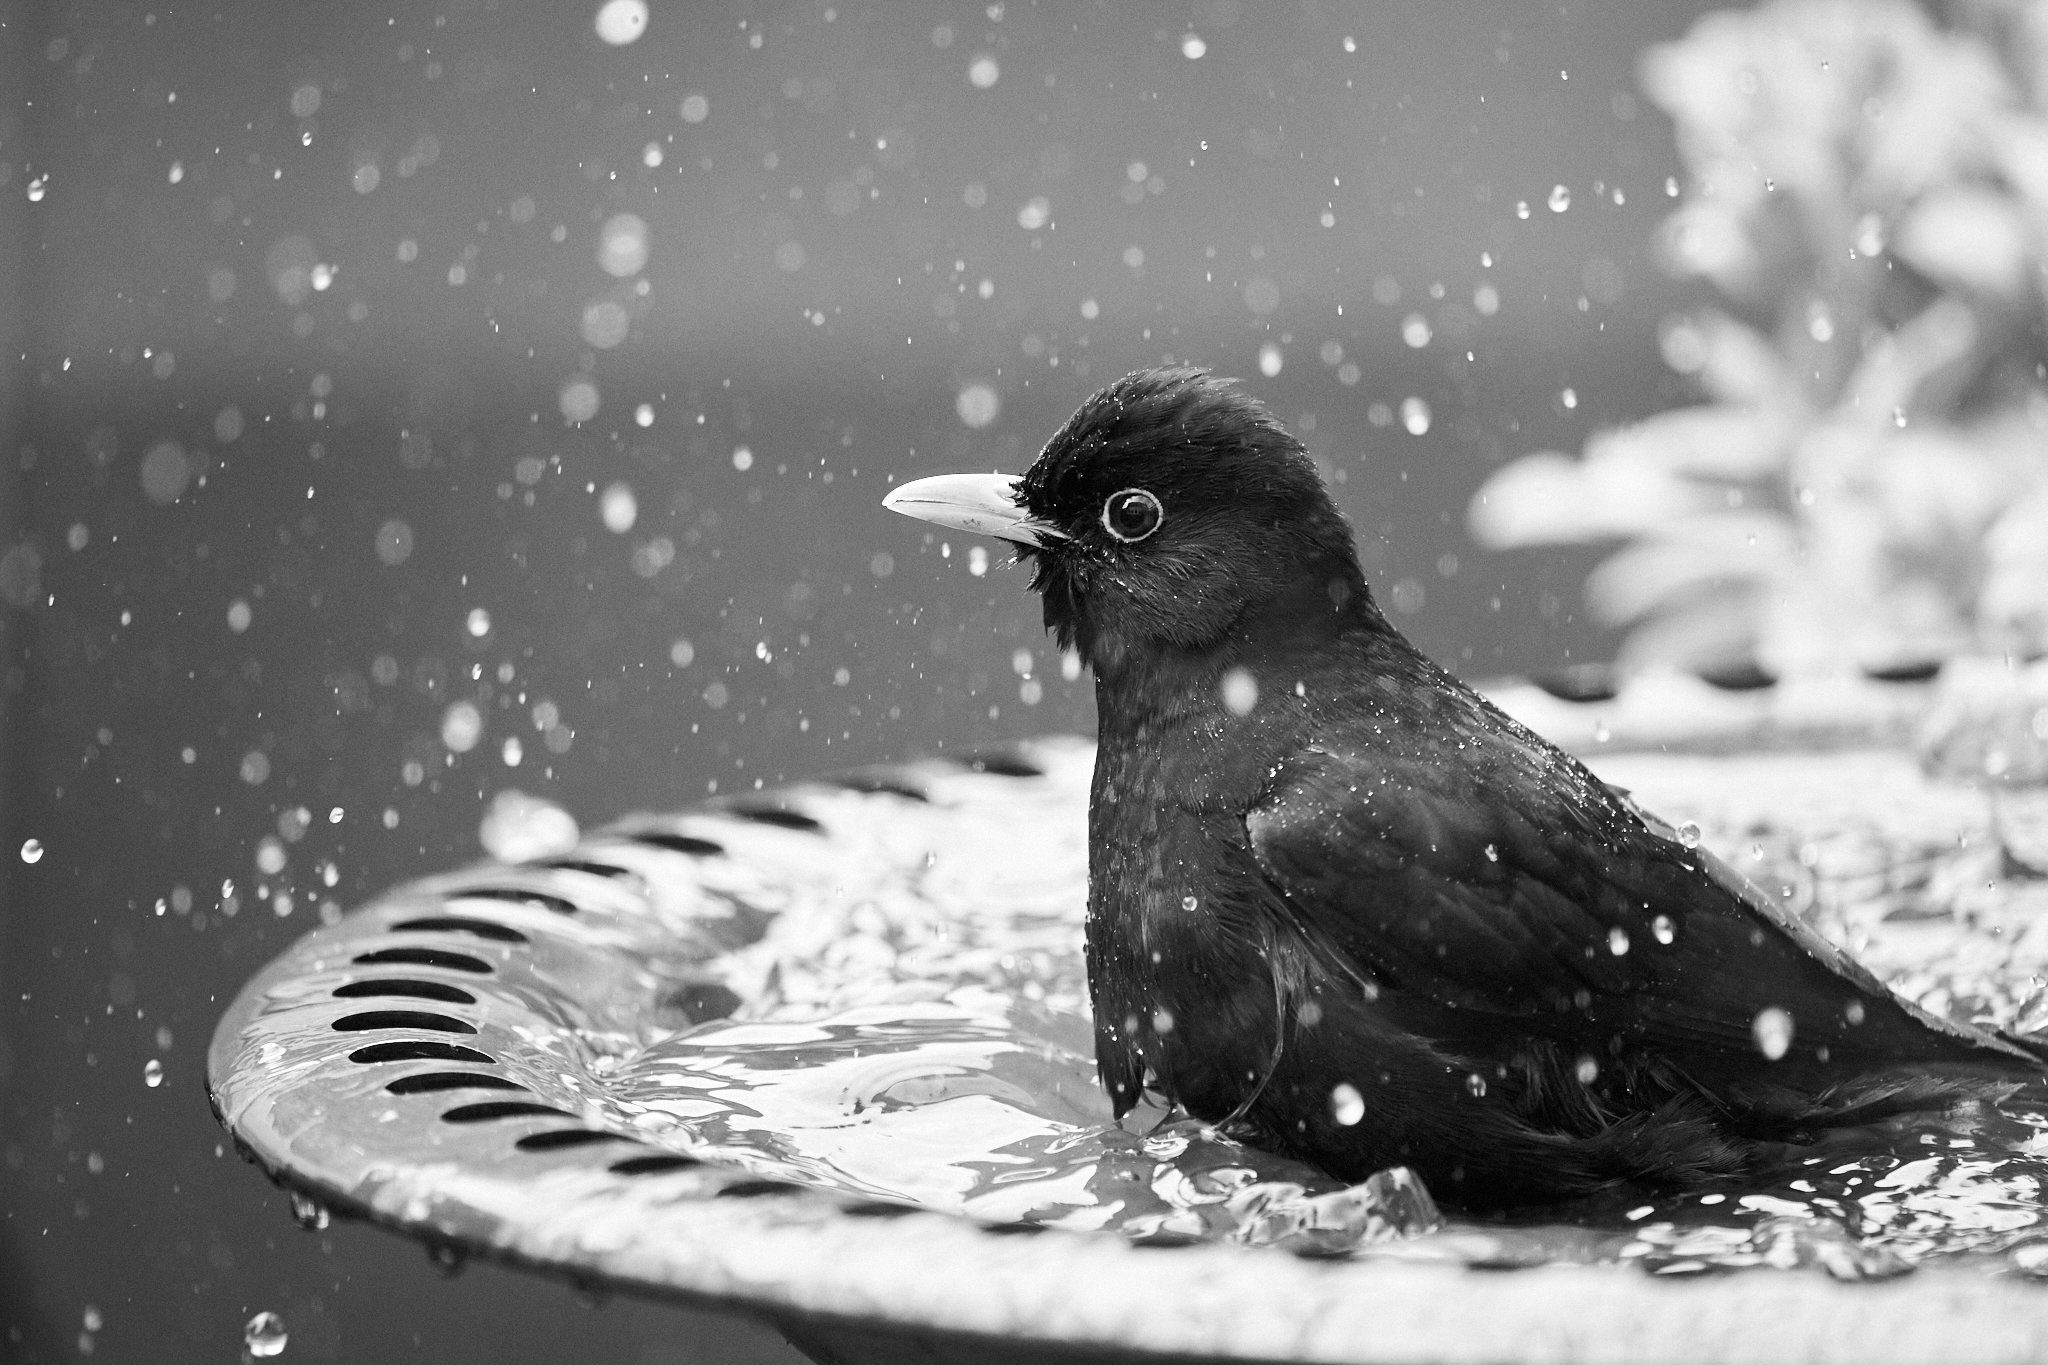  I don’t often see blackbirds using the bath as it’s quite close to the window and they’re very cautious, but this one seemed to appreciate a good wash in the fresh rainwater.  